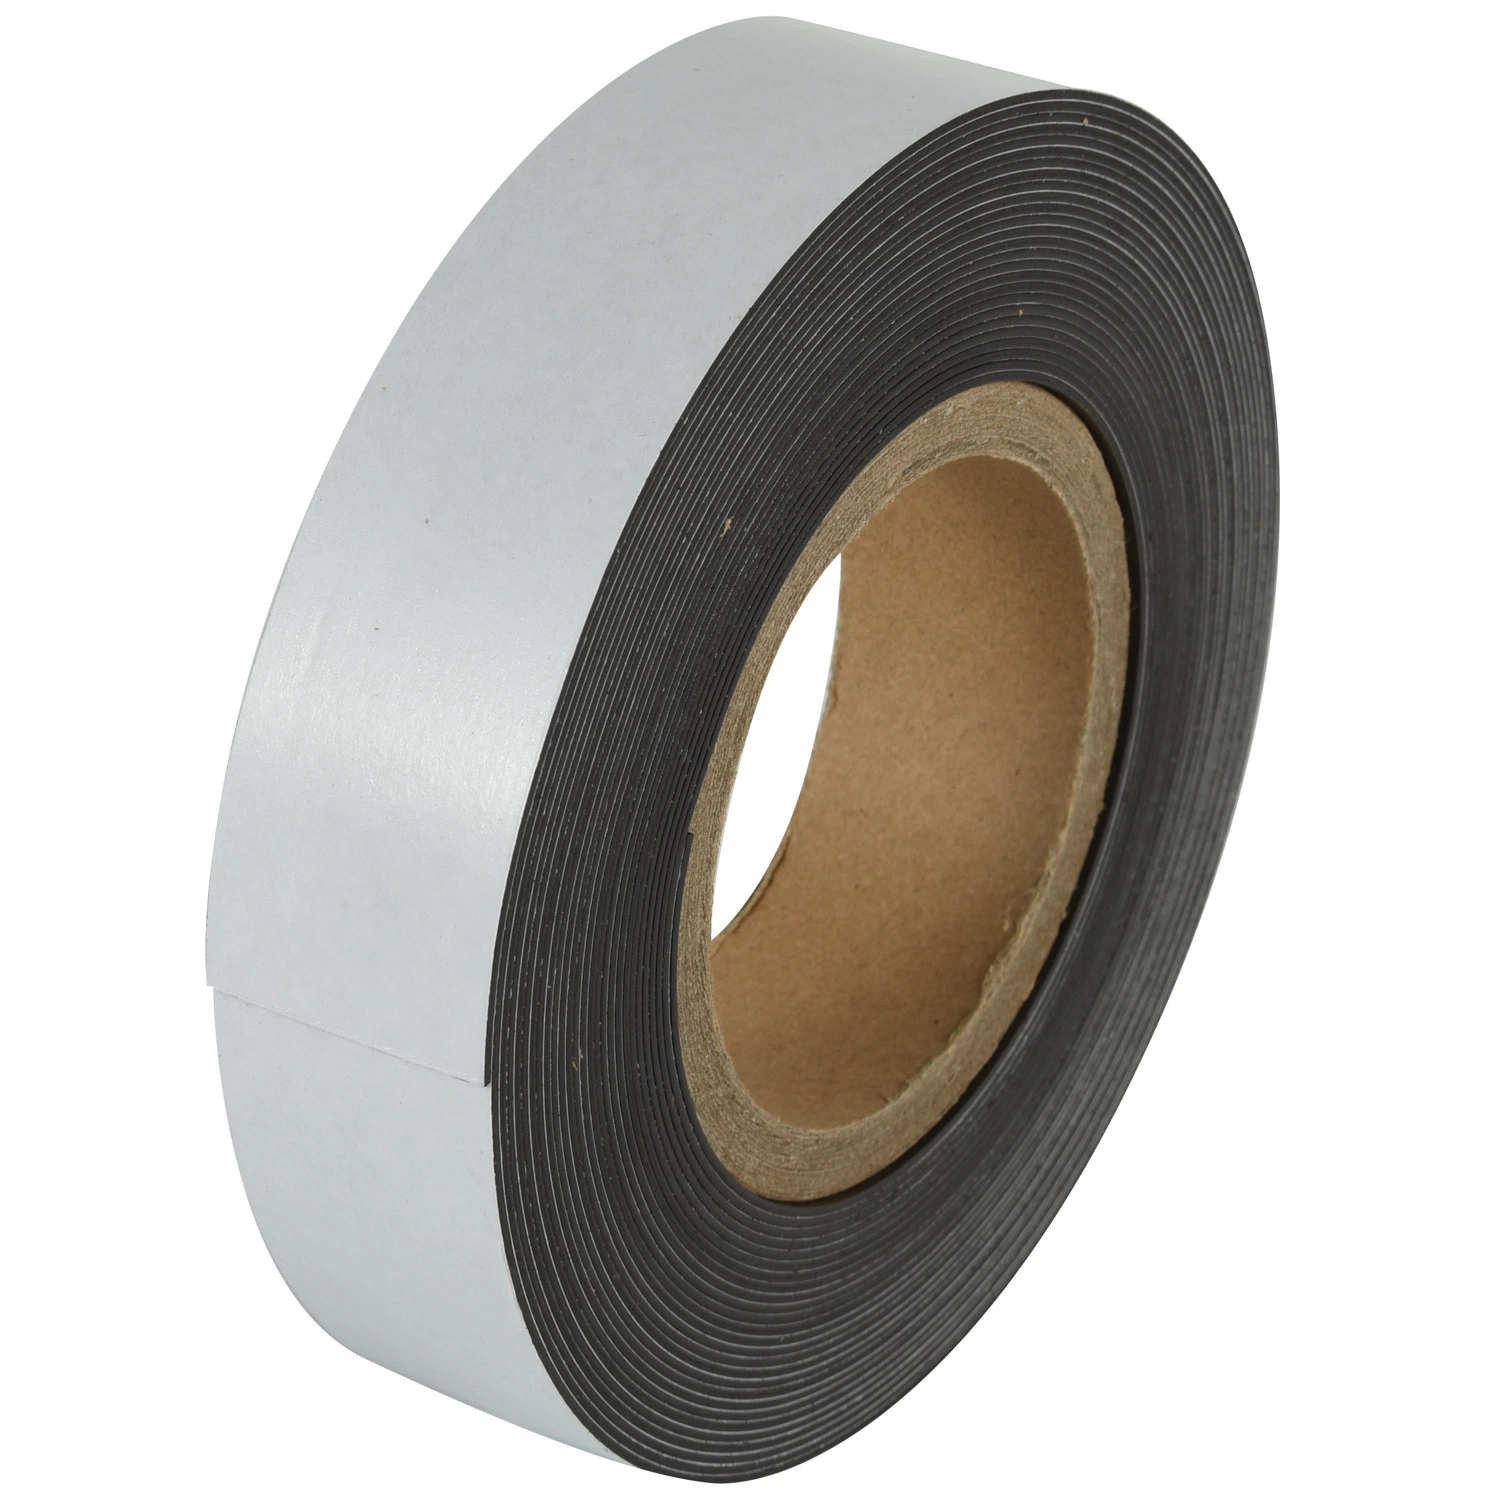 Double Sided Adhesive Flexible Magnetic Tape Material